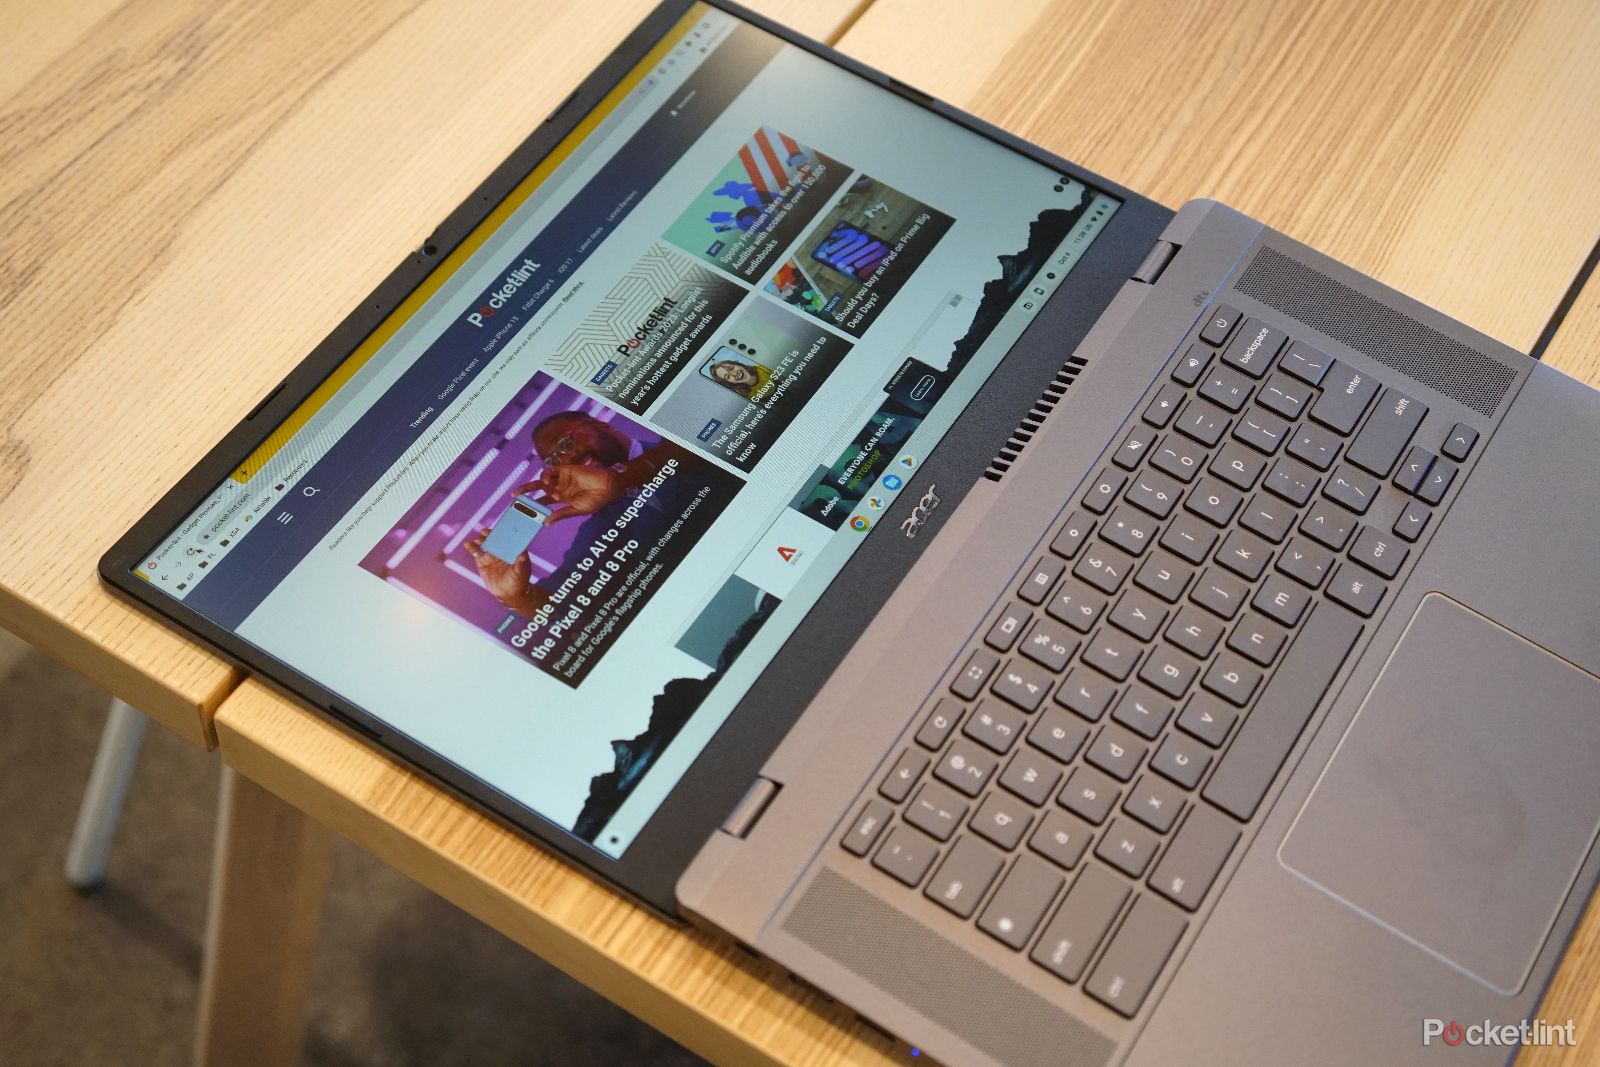 6 reasons to buy a Cromebook over a Windows laptop